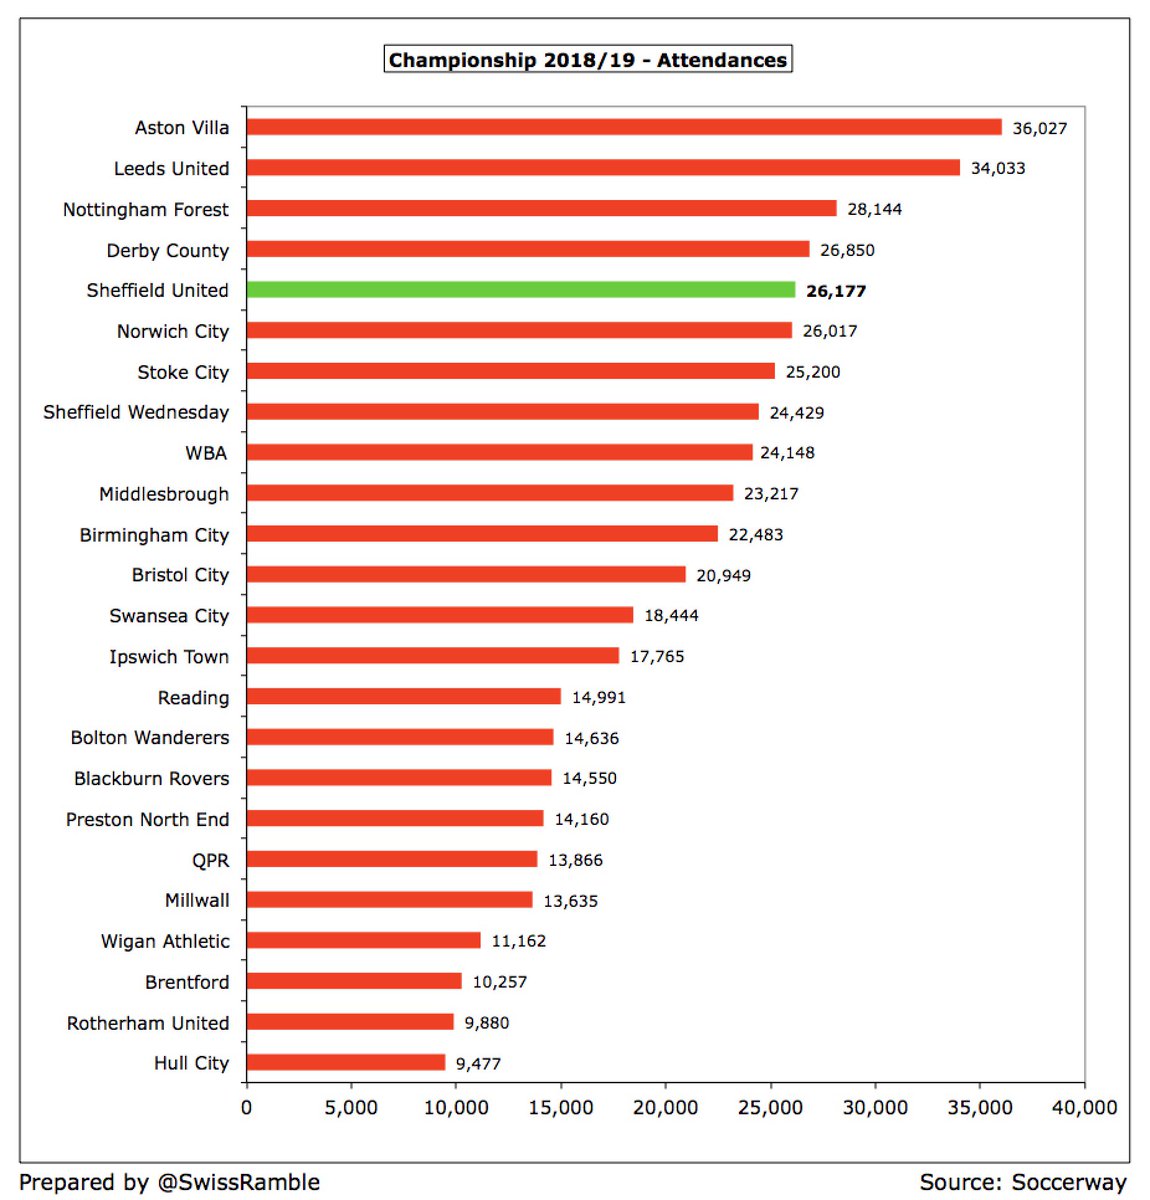  #SUFC average attendance of 26,177 was the 5th largest in the Championship, only surpassed by  #AVFC,  #LUFC,  #NFFC and  #DCFC. Also higher than 6 clubs in the Premier League. Ticket prices were increased by 11% following promotion, but still cheapest in the top flight.